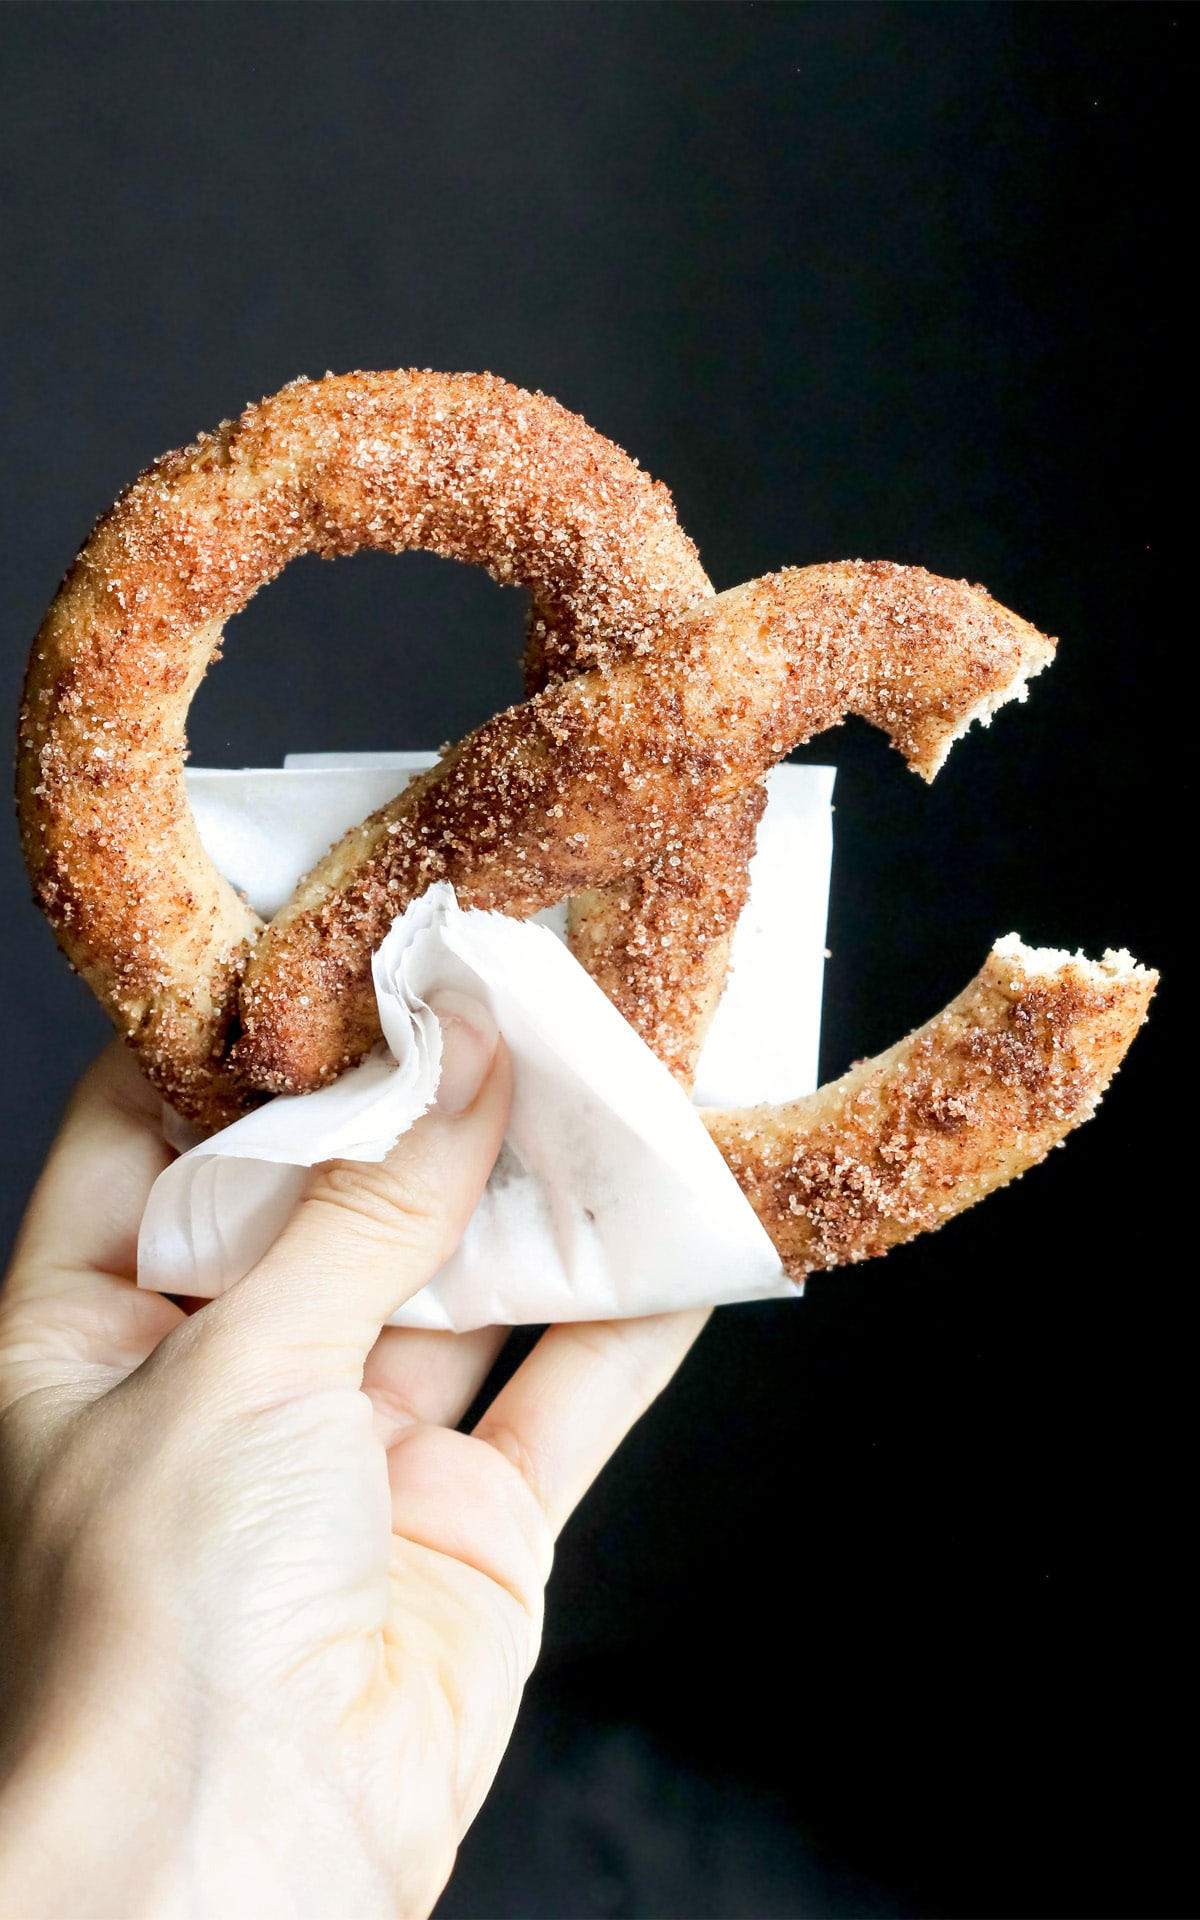 These Healthy Low Carb and Gluten Free Cinnamon Sugar Soft Pretzels are so fluffy and delicious, you'll never believe they're sugar free, low carb, high protein, and high fiber! -- Healthy Dessert Recipes with sugar free, low calorie, low fat, high protein, gluten free, dairy free, vegan, and raw options at the Desserts With Benefits Blog (www.DessertsWithBenefits.com)